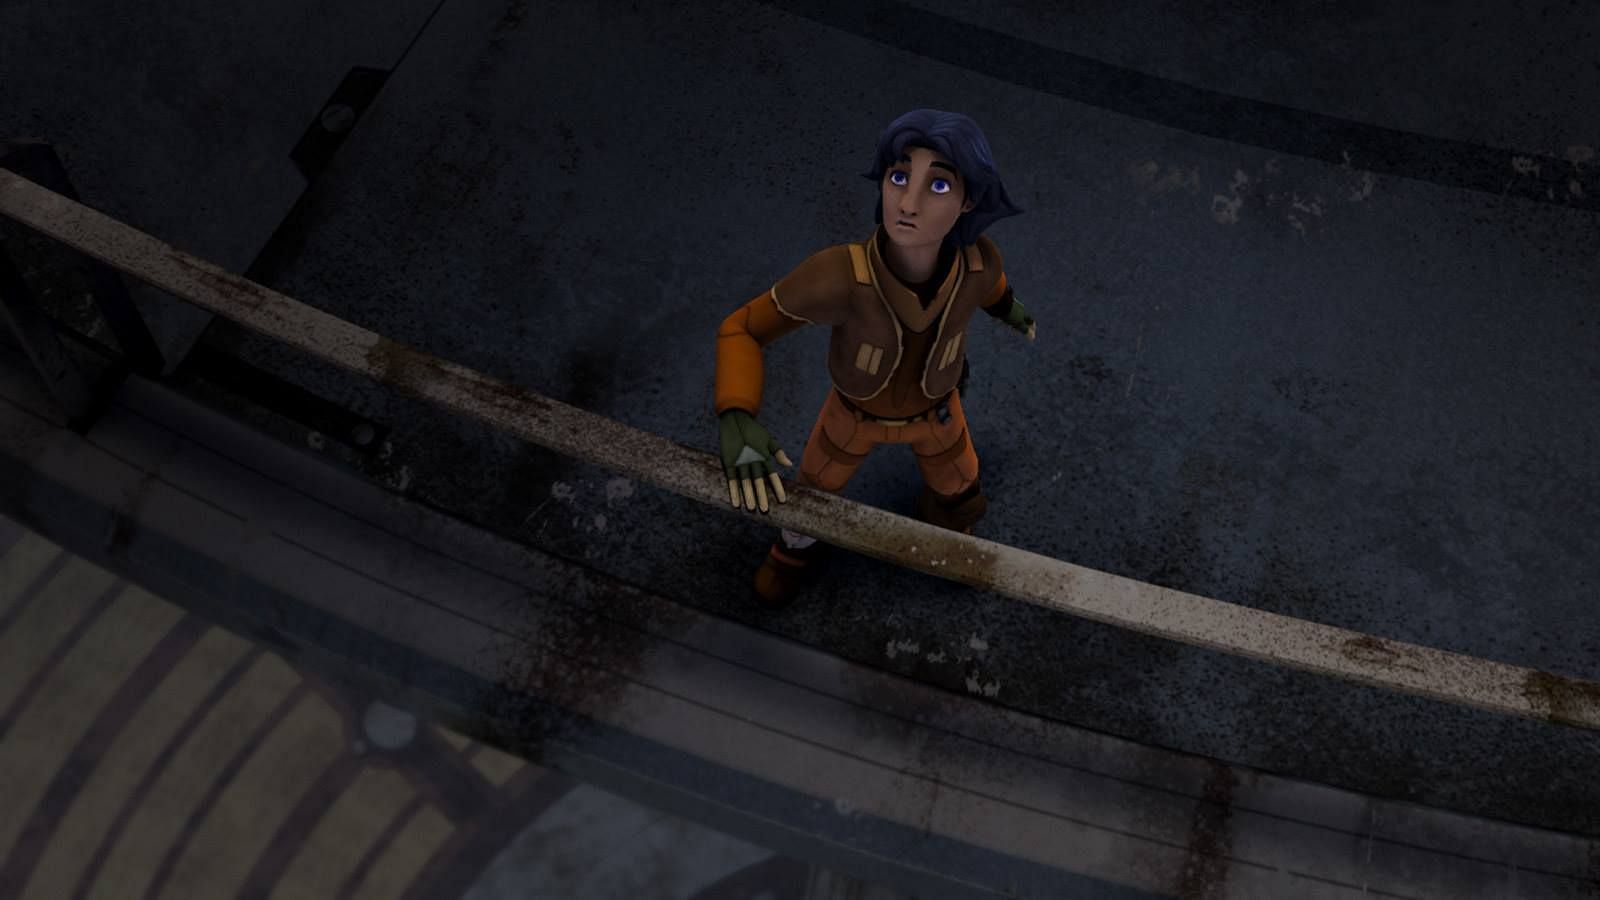 Where does Star Wars Rebels occur?